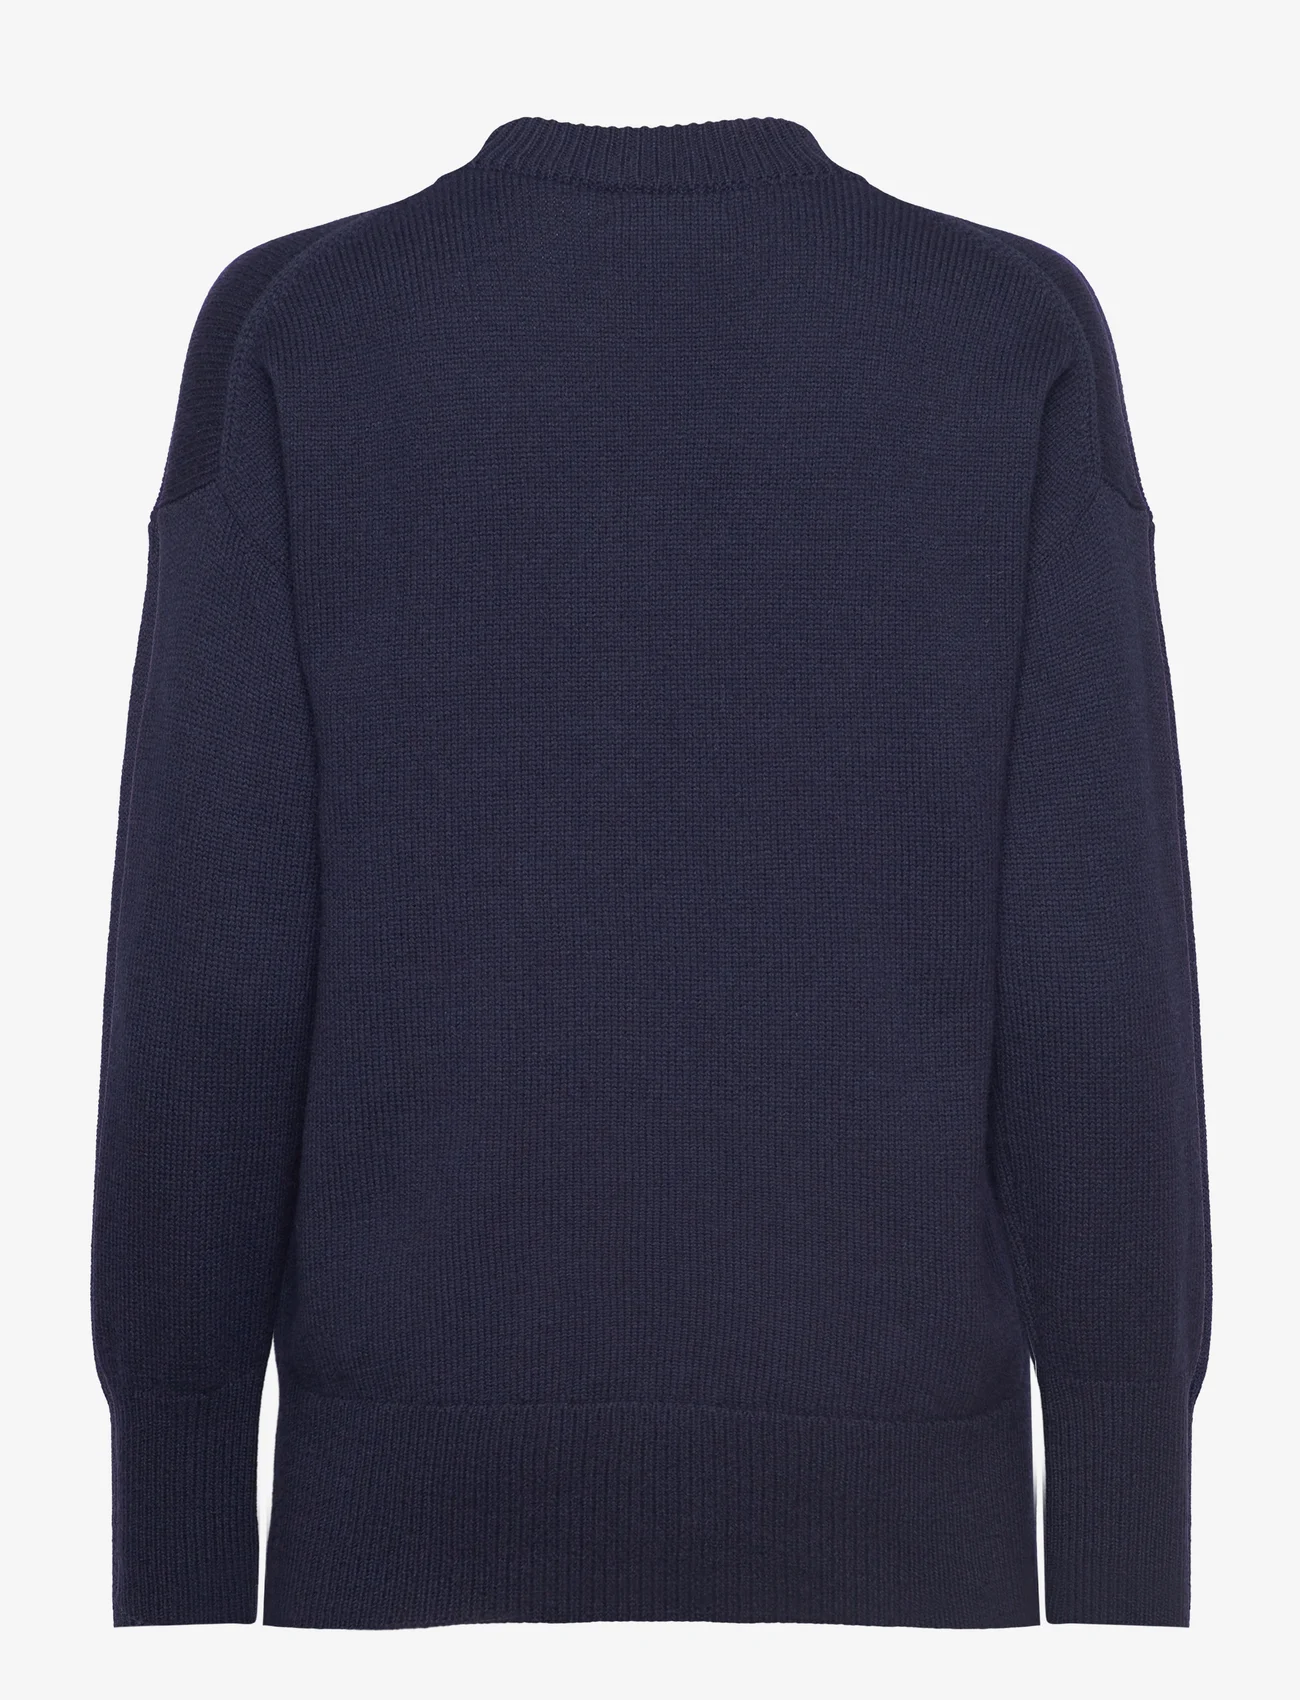 Andiata - Salome knit - jumpers - deep navy blue - 1